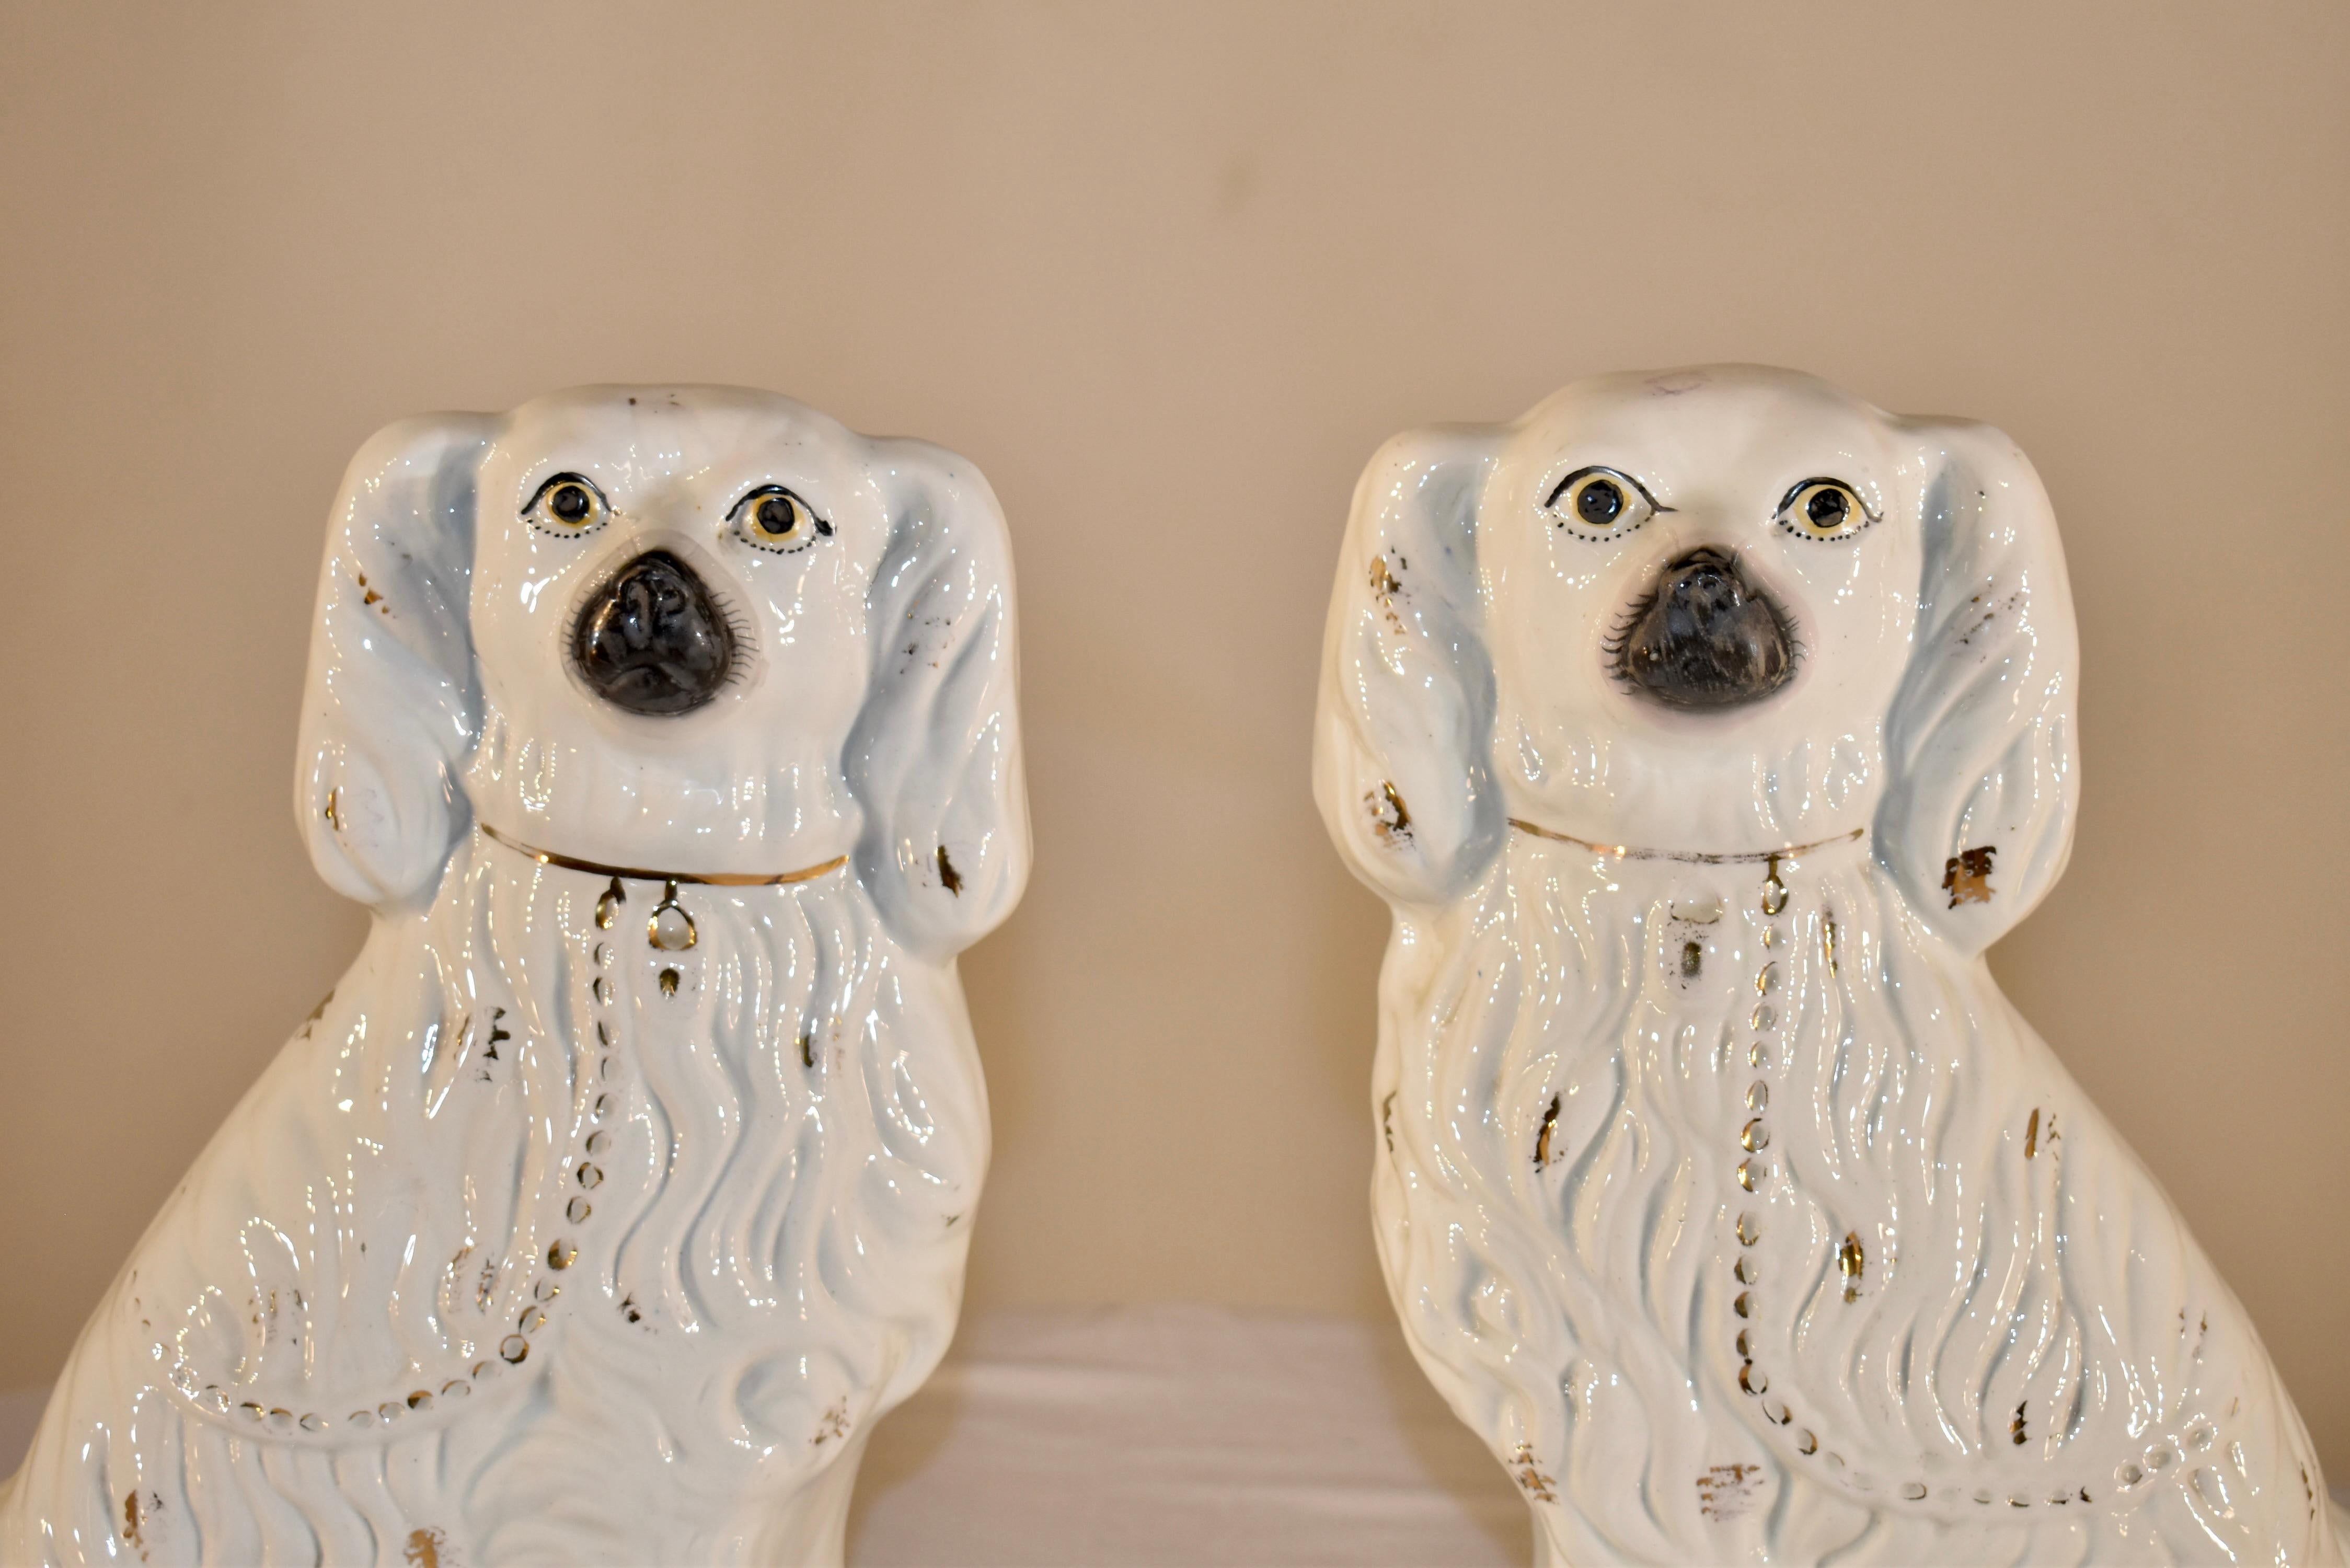 Pair of enormous 19th century Staffordshire spaniels from England. This pair of dogs are wonderfully detailed and are magnificent in stature. They have gorgeous faces and are decorated with gold lustre spotting.